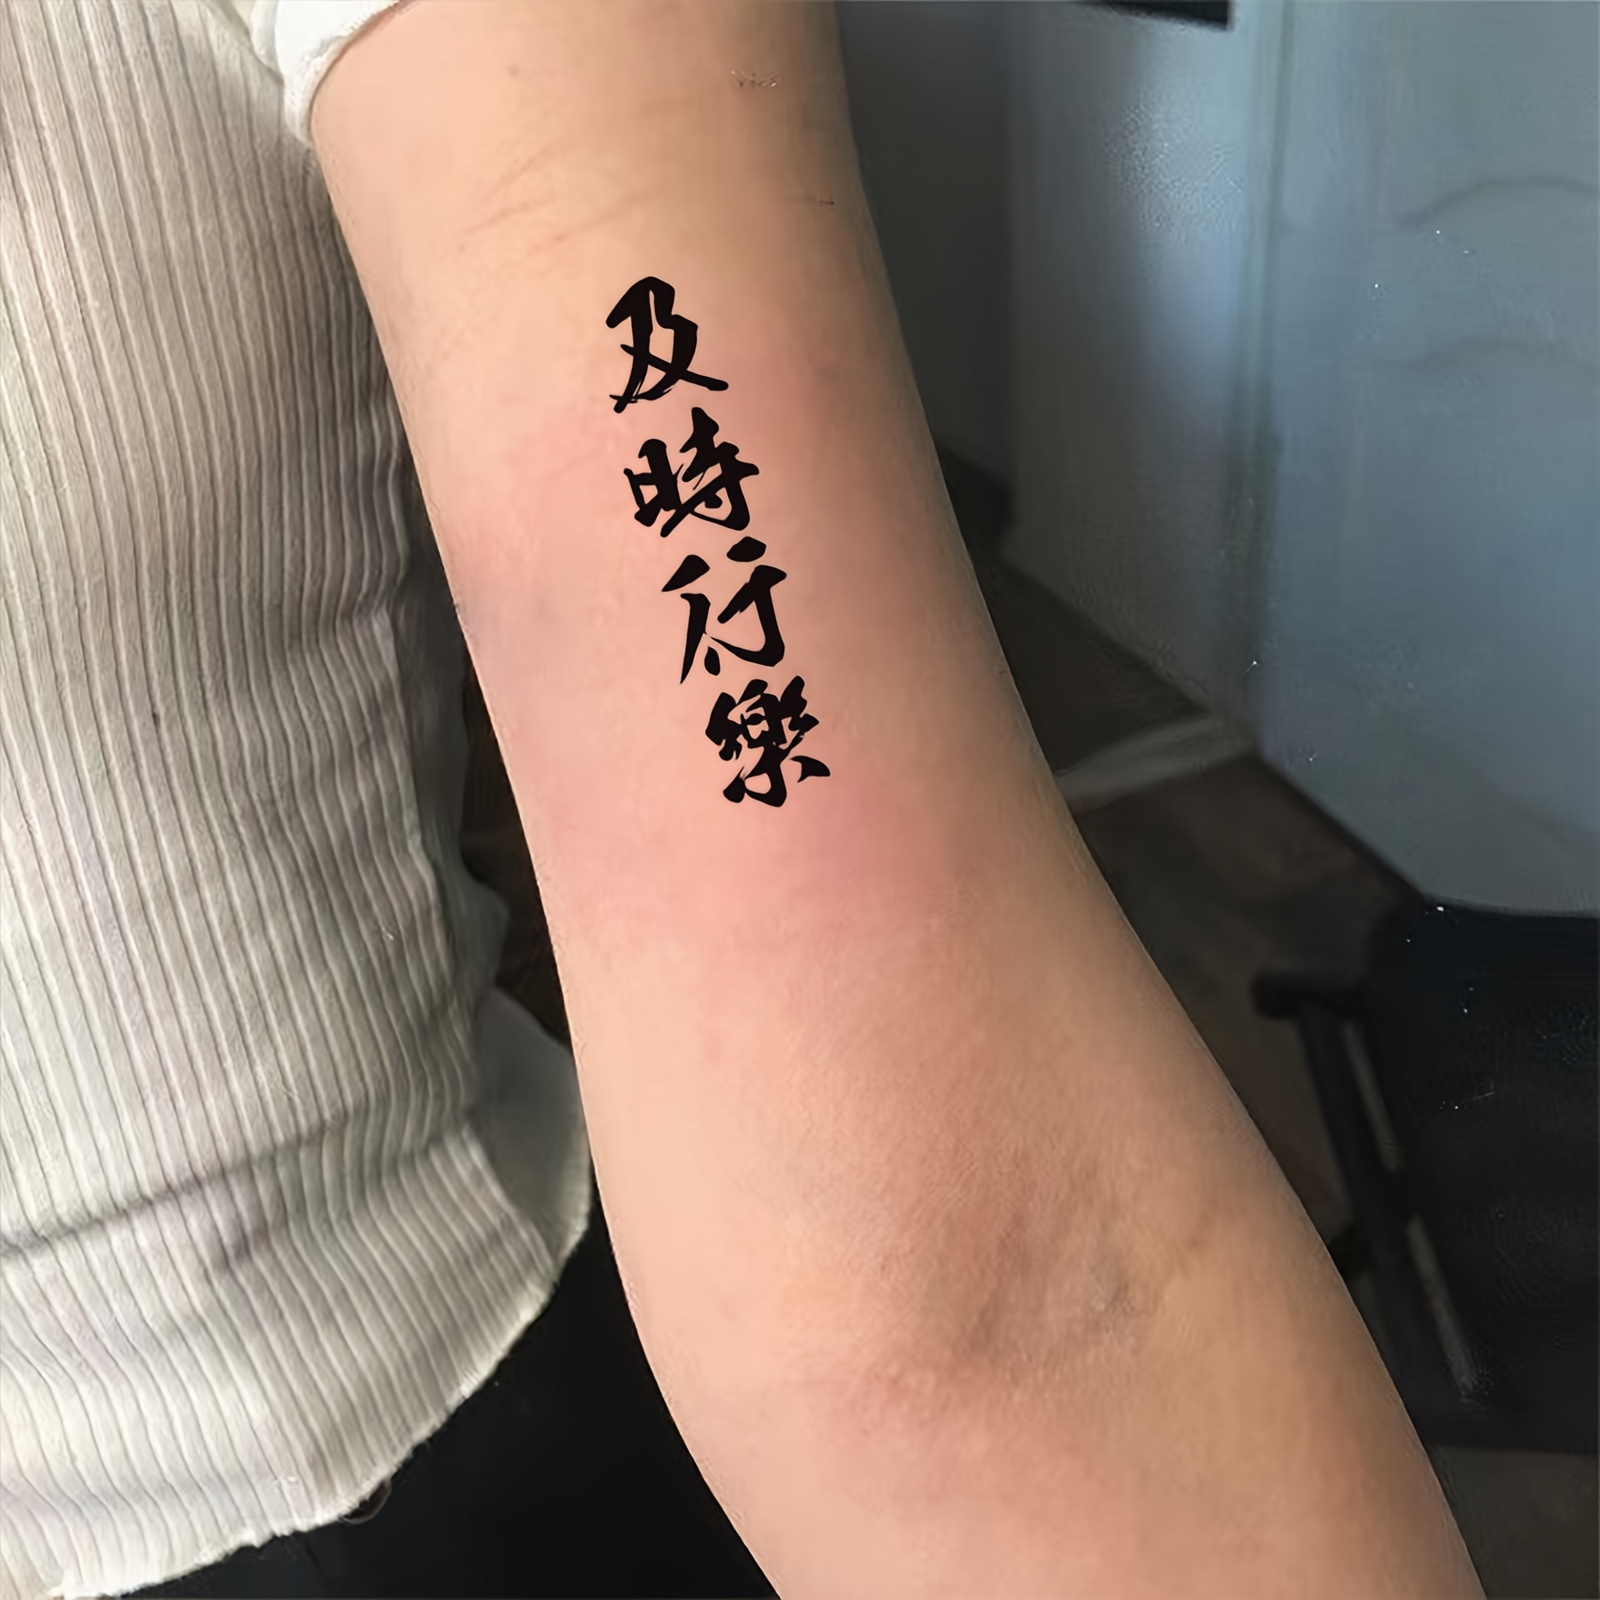 Chinese characters tattoo located on the inner arm.